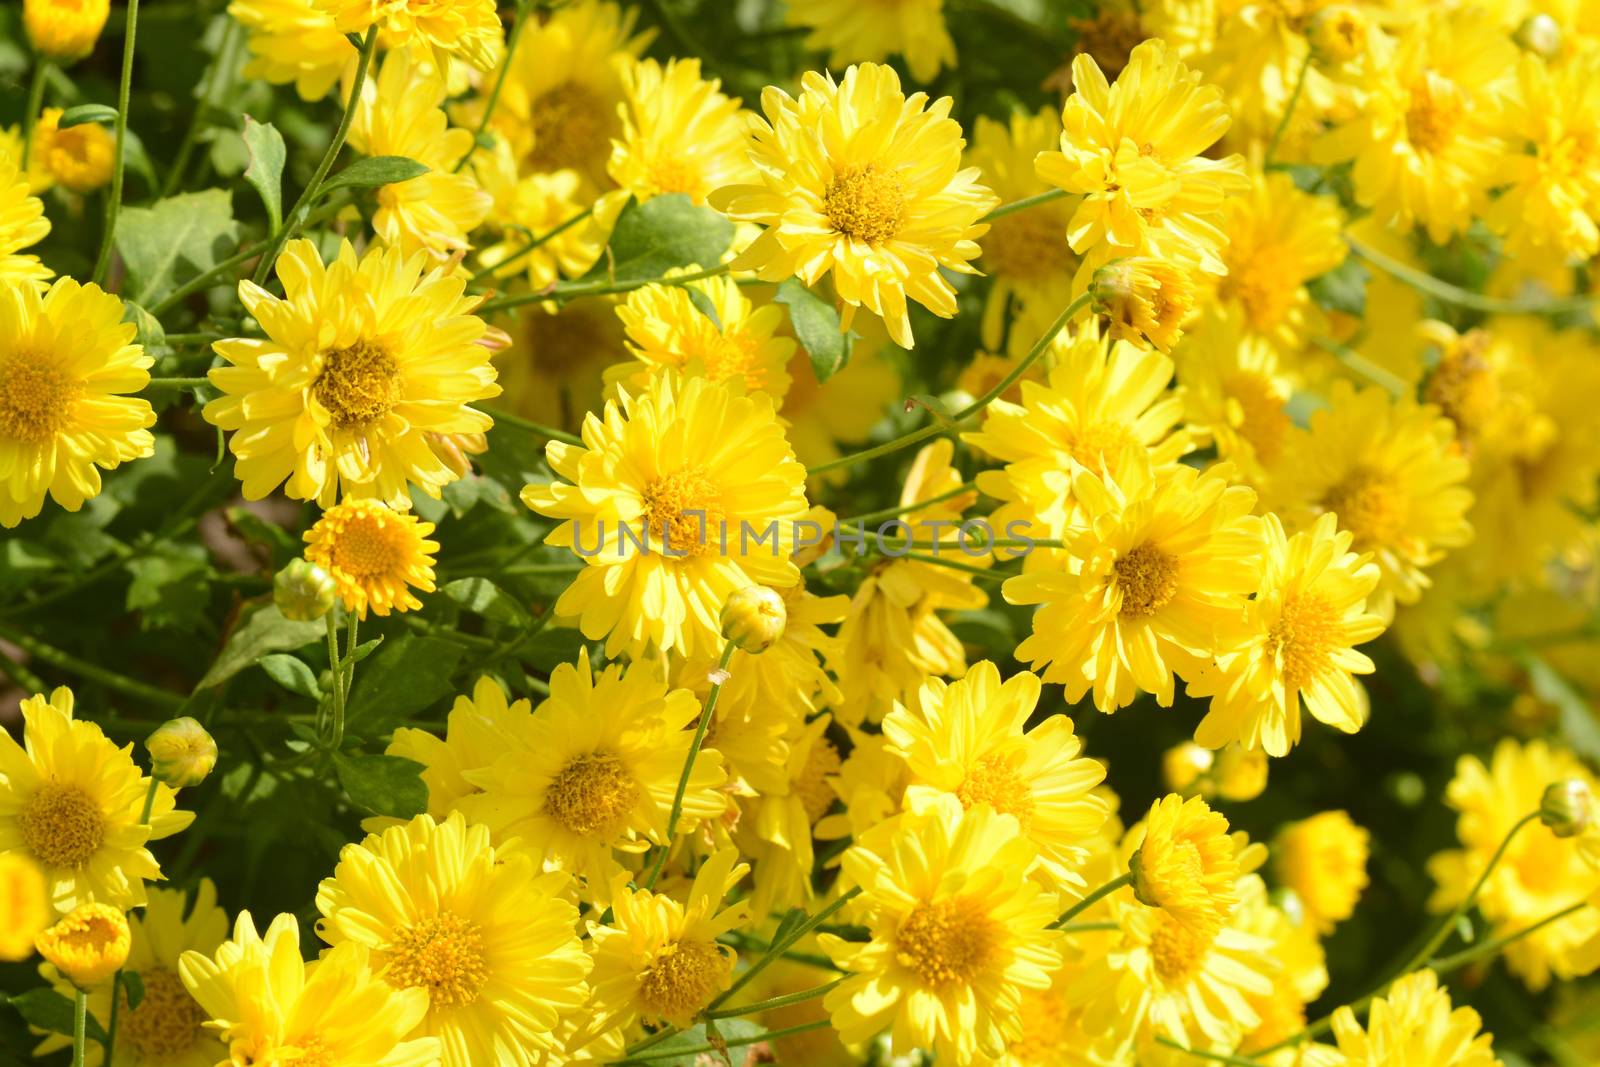 Chrysanthemum morifolium Ramat is a perennial herb covered with yellow villous hairs, cultivated in many areas in China for medicinal and food applications as well as for ornamental use.